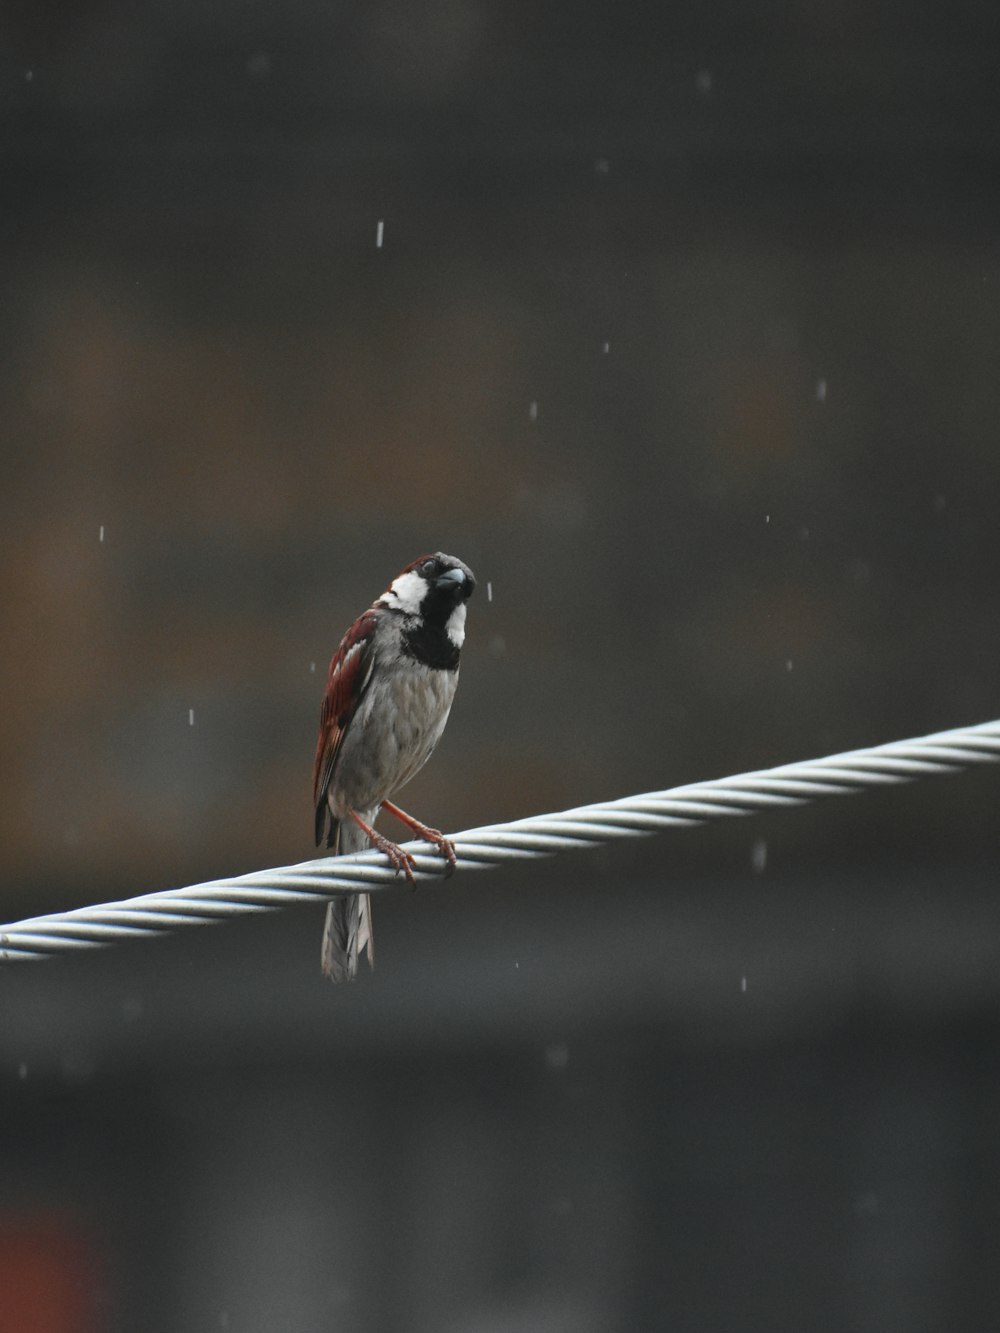 a small bird sitting on a wire in the rain